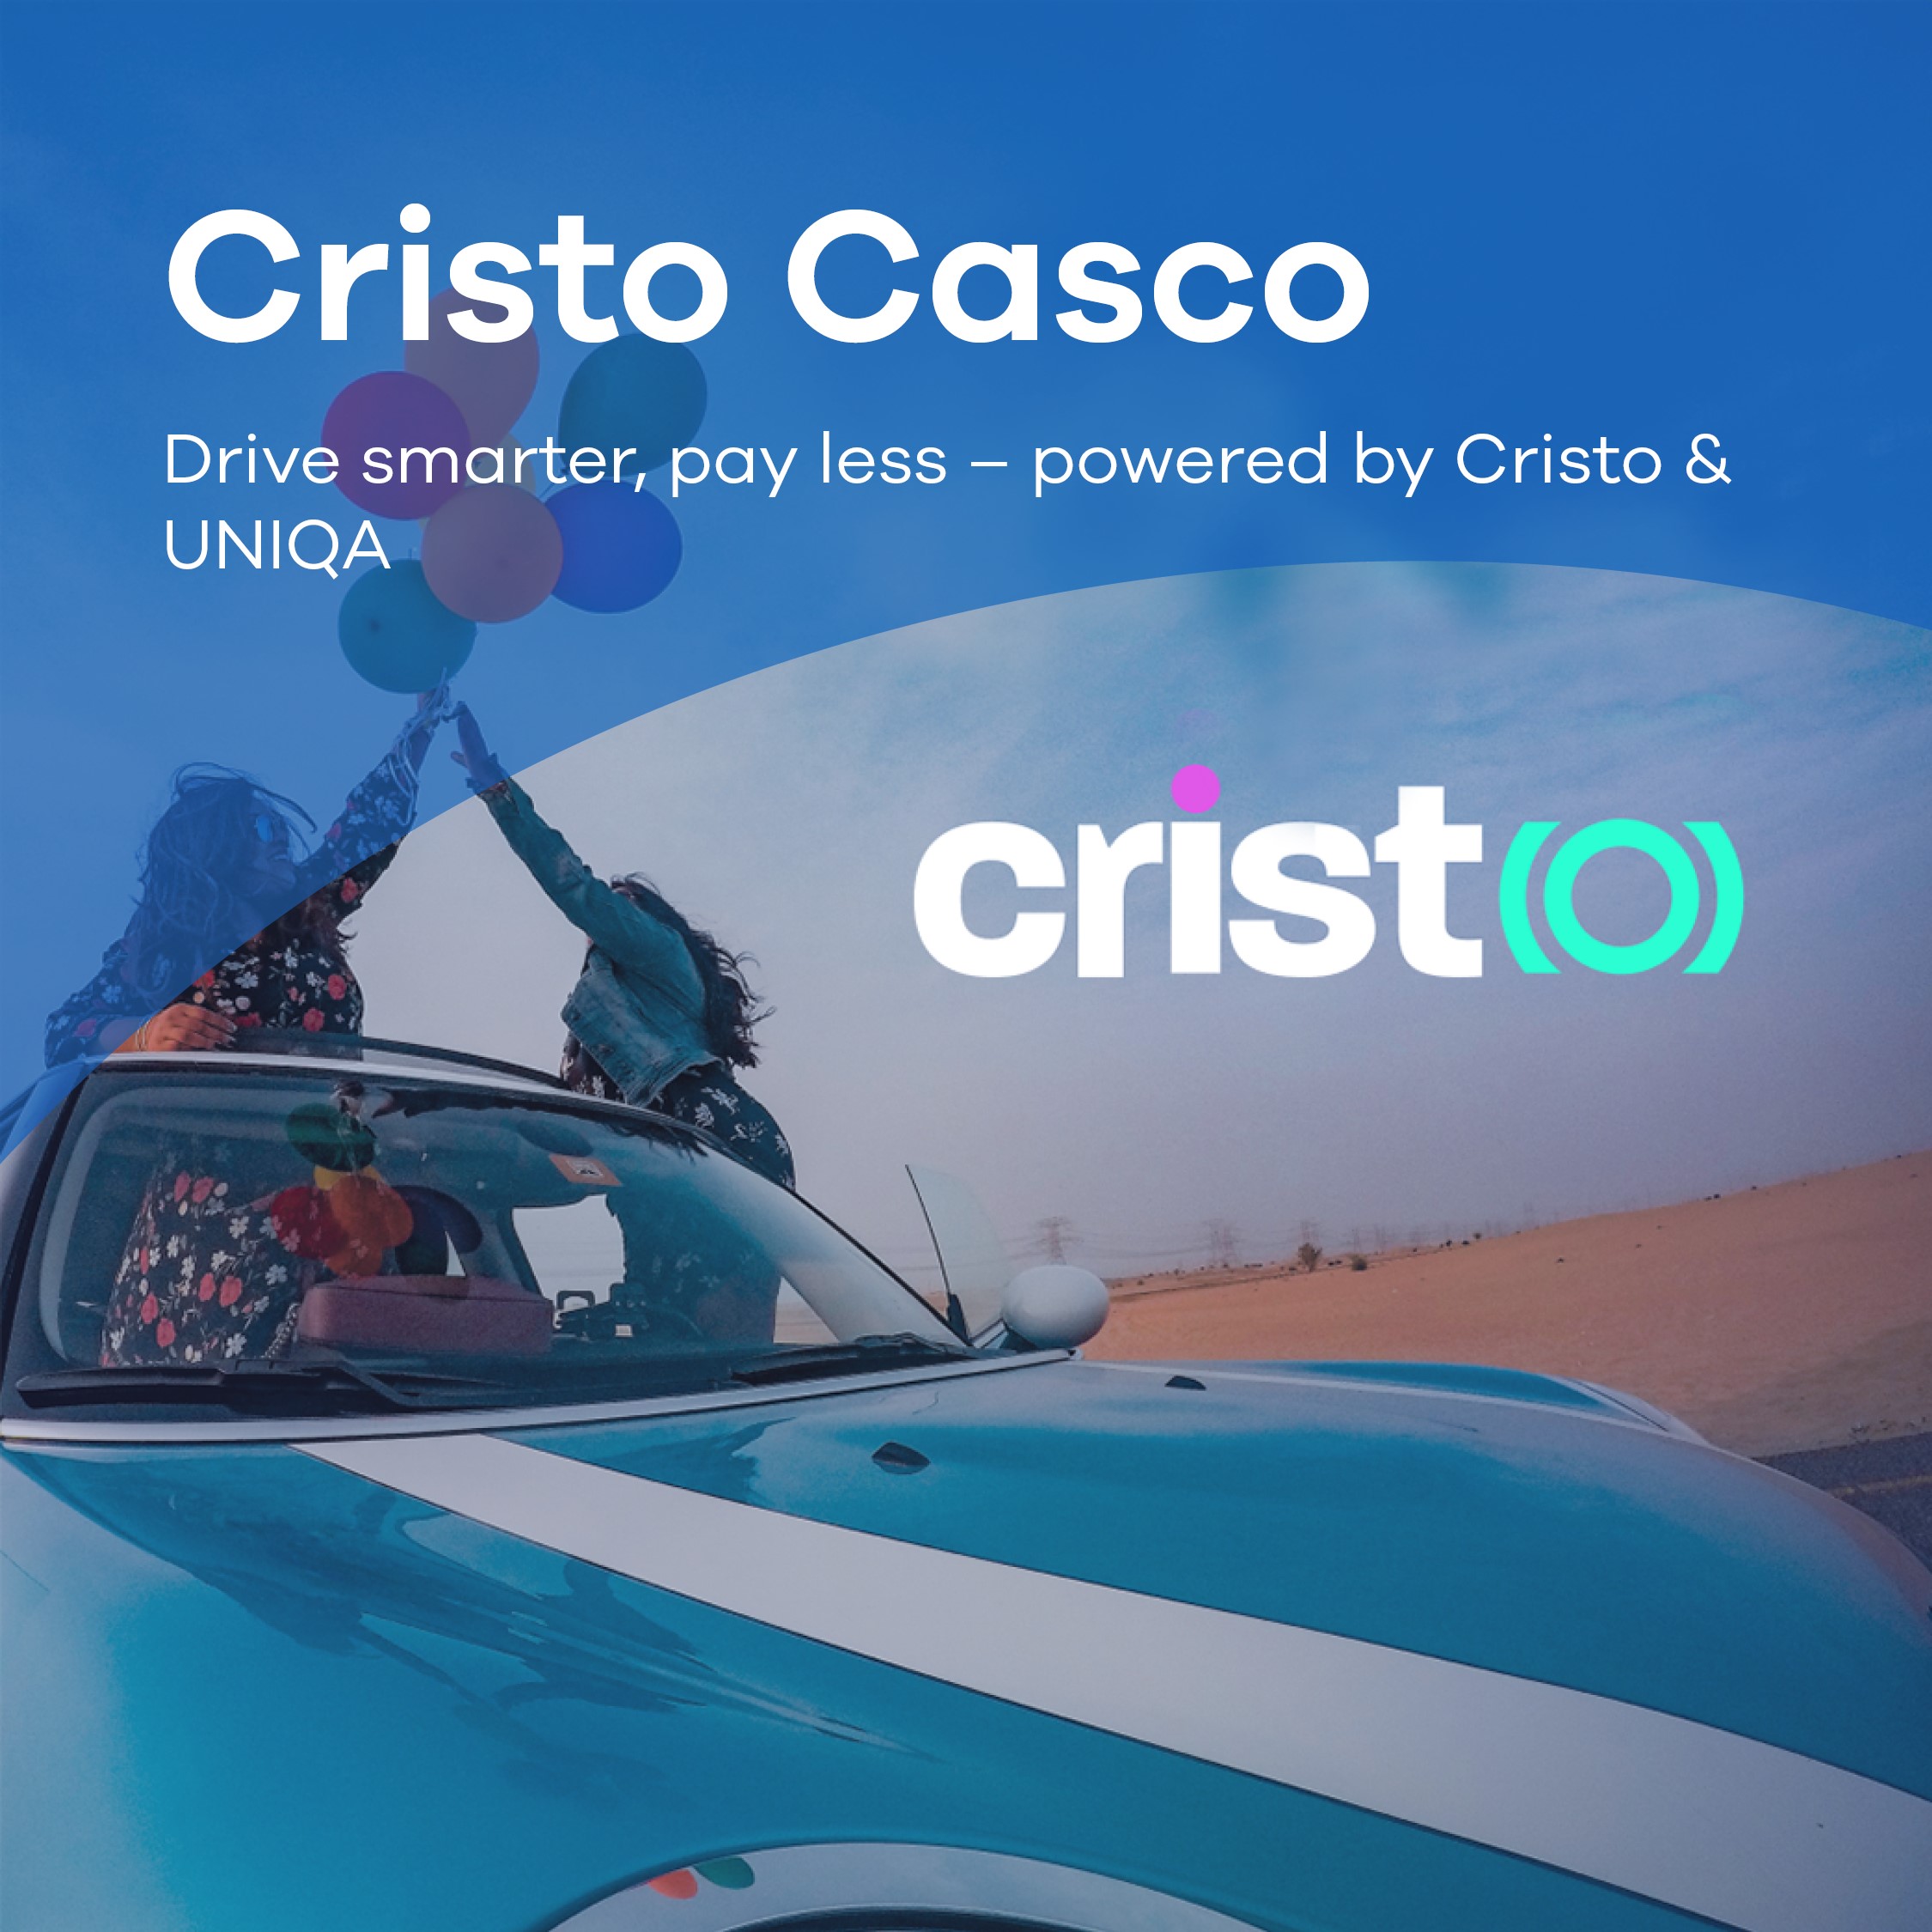 Drive smarter, pay less: Switch now to our new usage-based casco insurance powered by Cristo and UNIQA